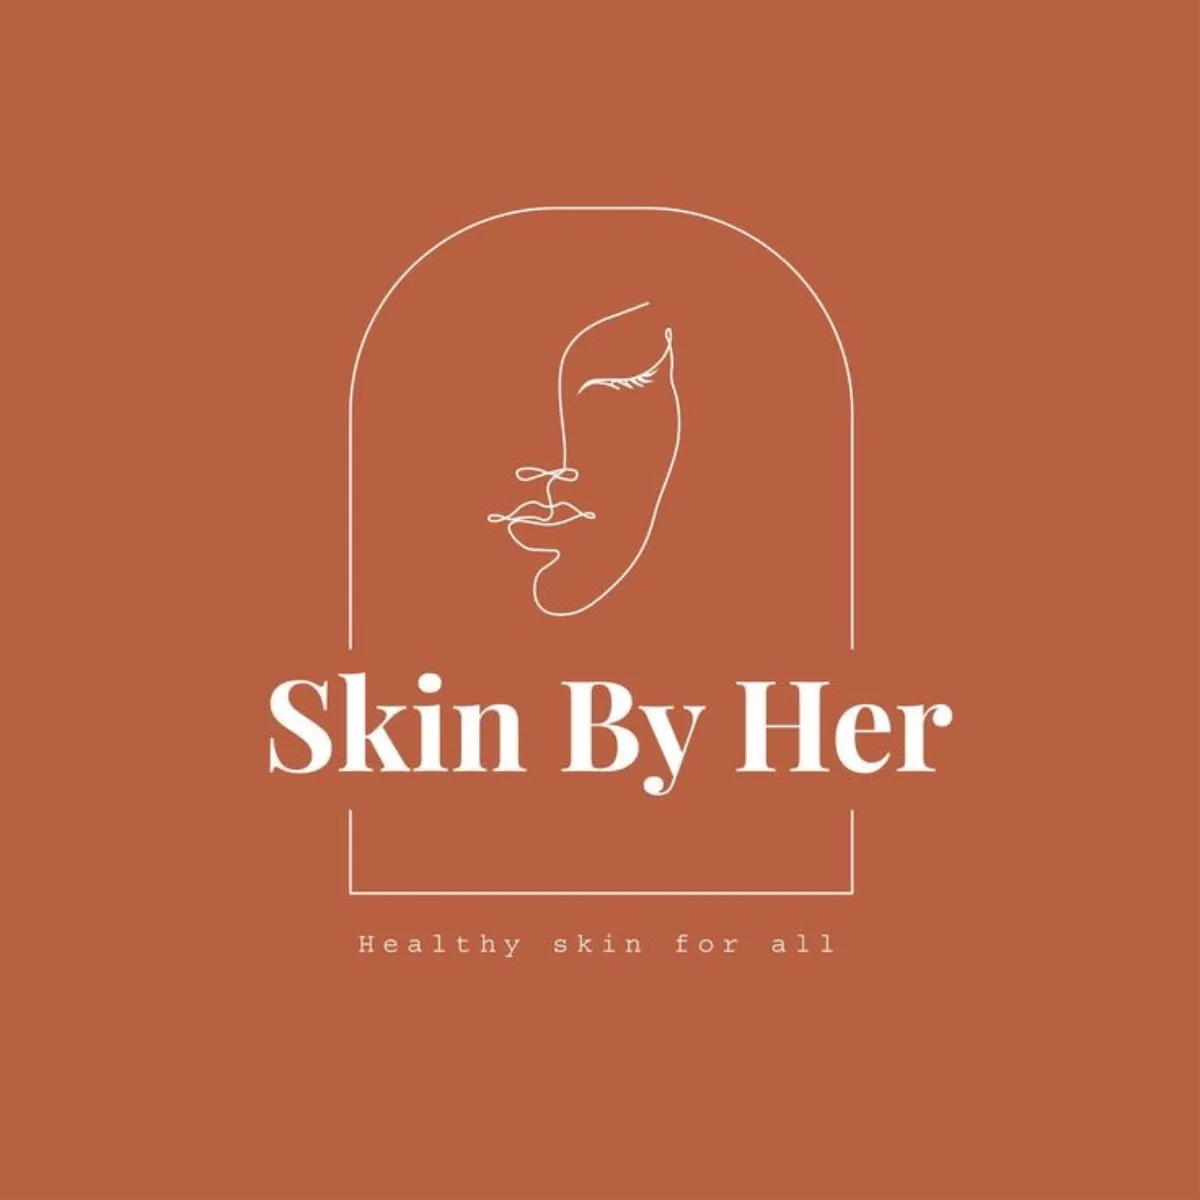 Skin by Her